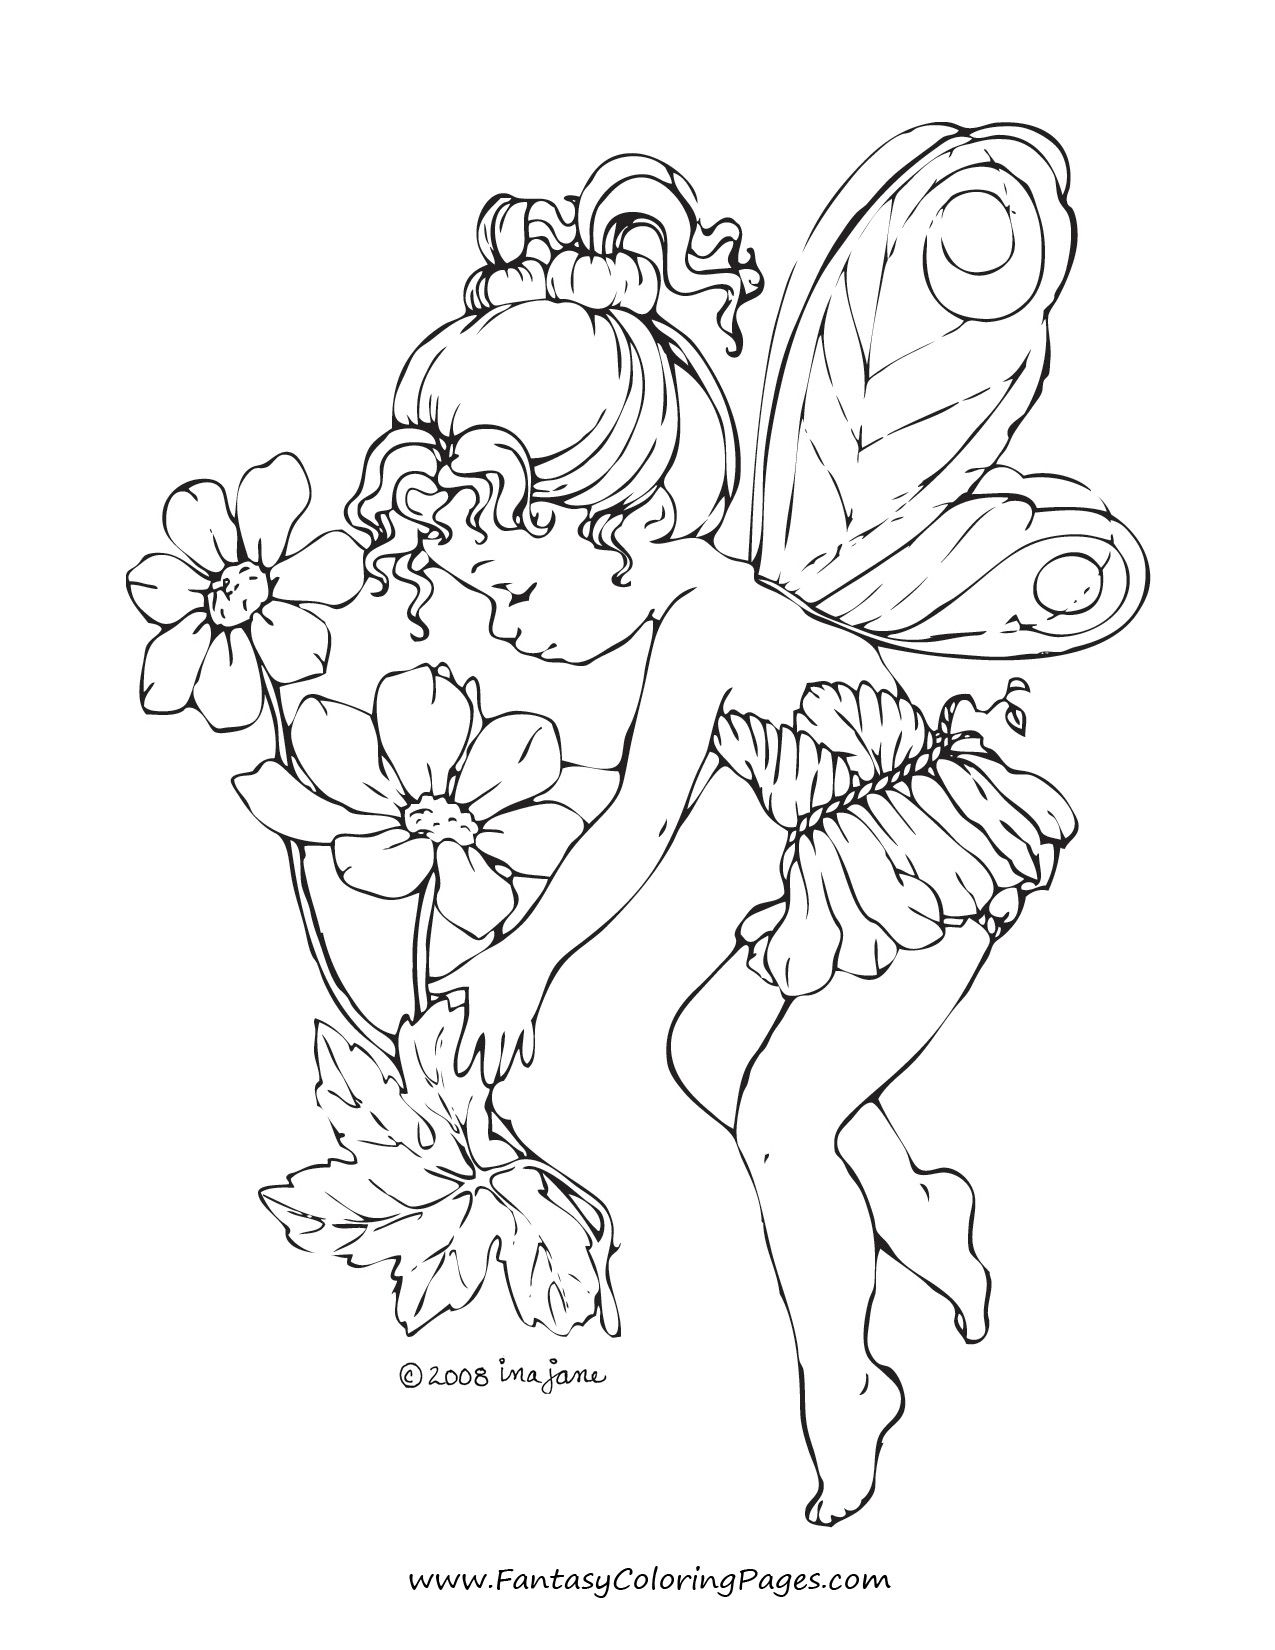 Free Printable Fairy Coloring Pages For Kids | Zcards (People B&amp;amp;w - Free Printable Fairy Coloring Pictures